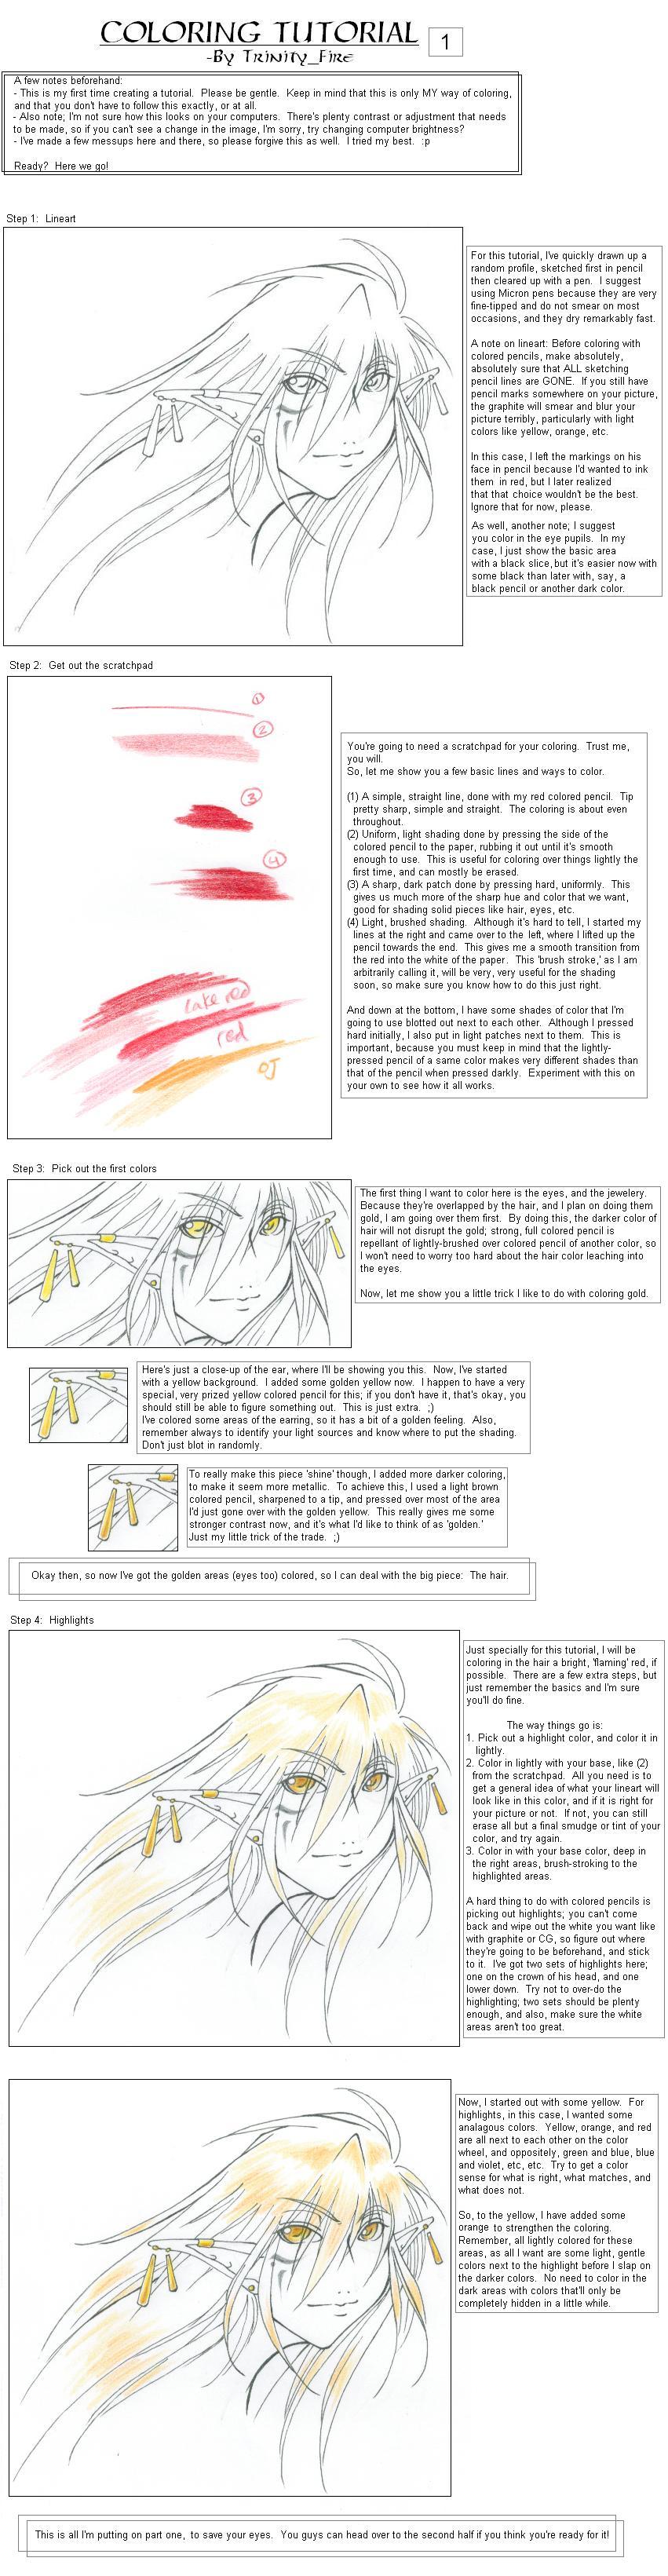 Coloring Tutorial - Part 1 by Trinity_Fire